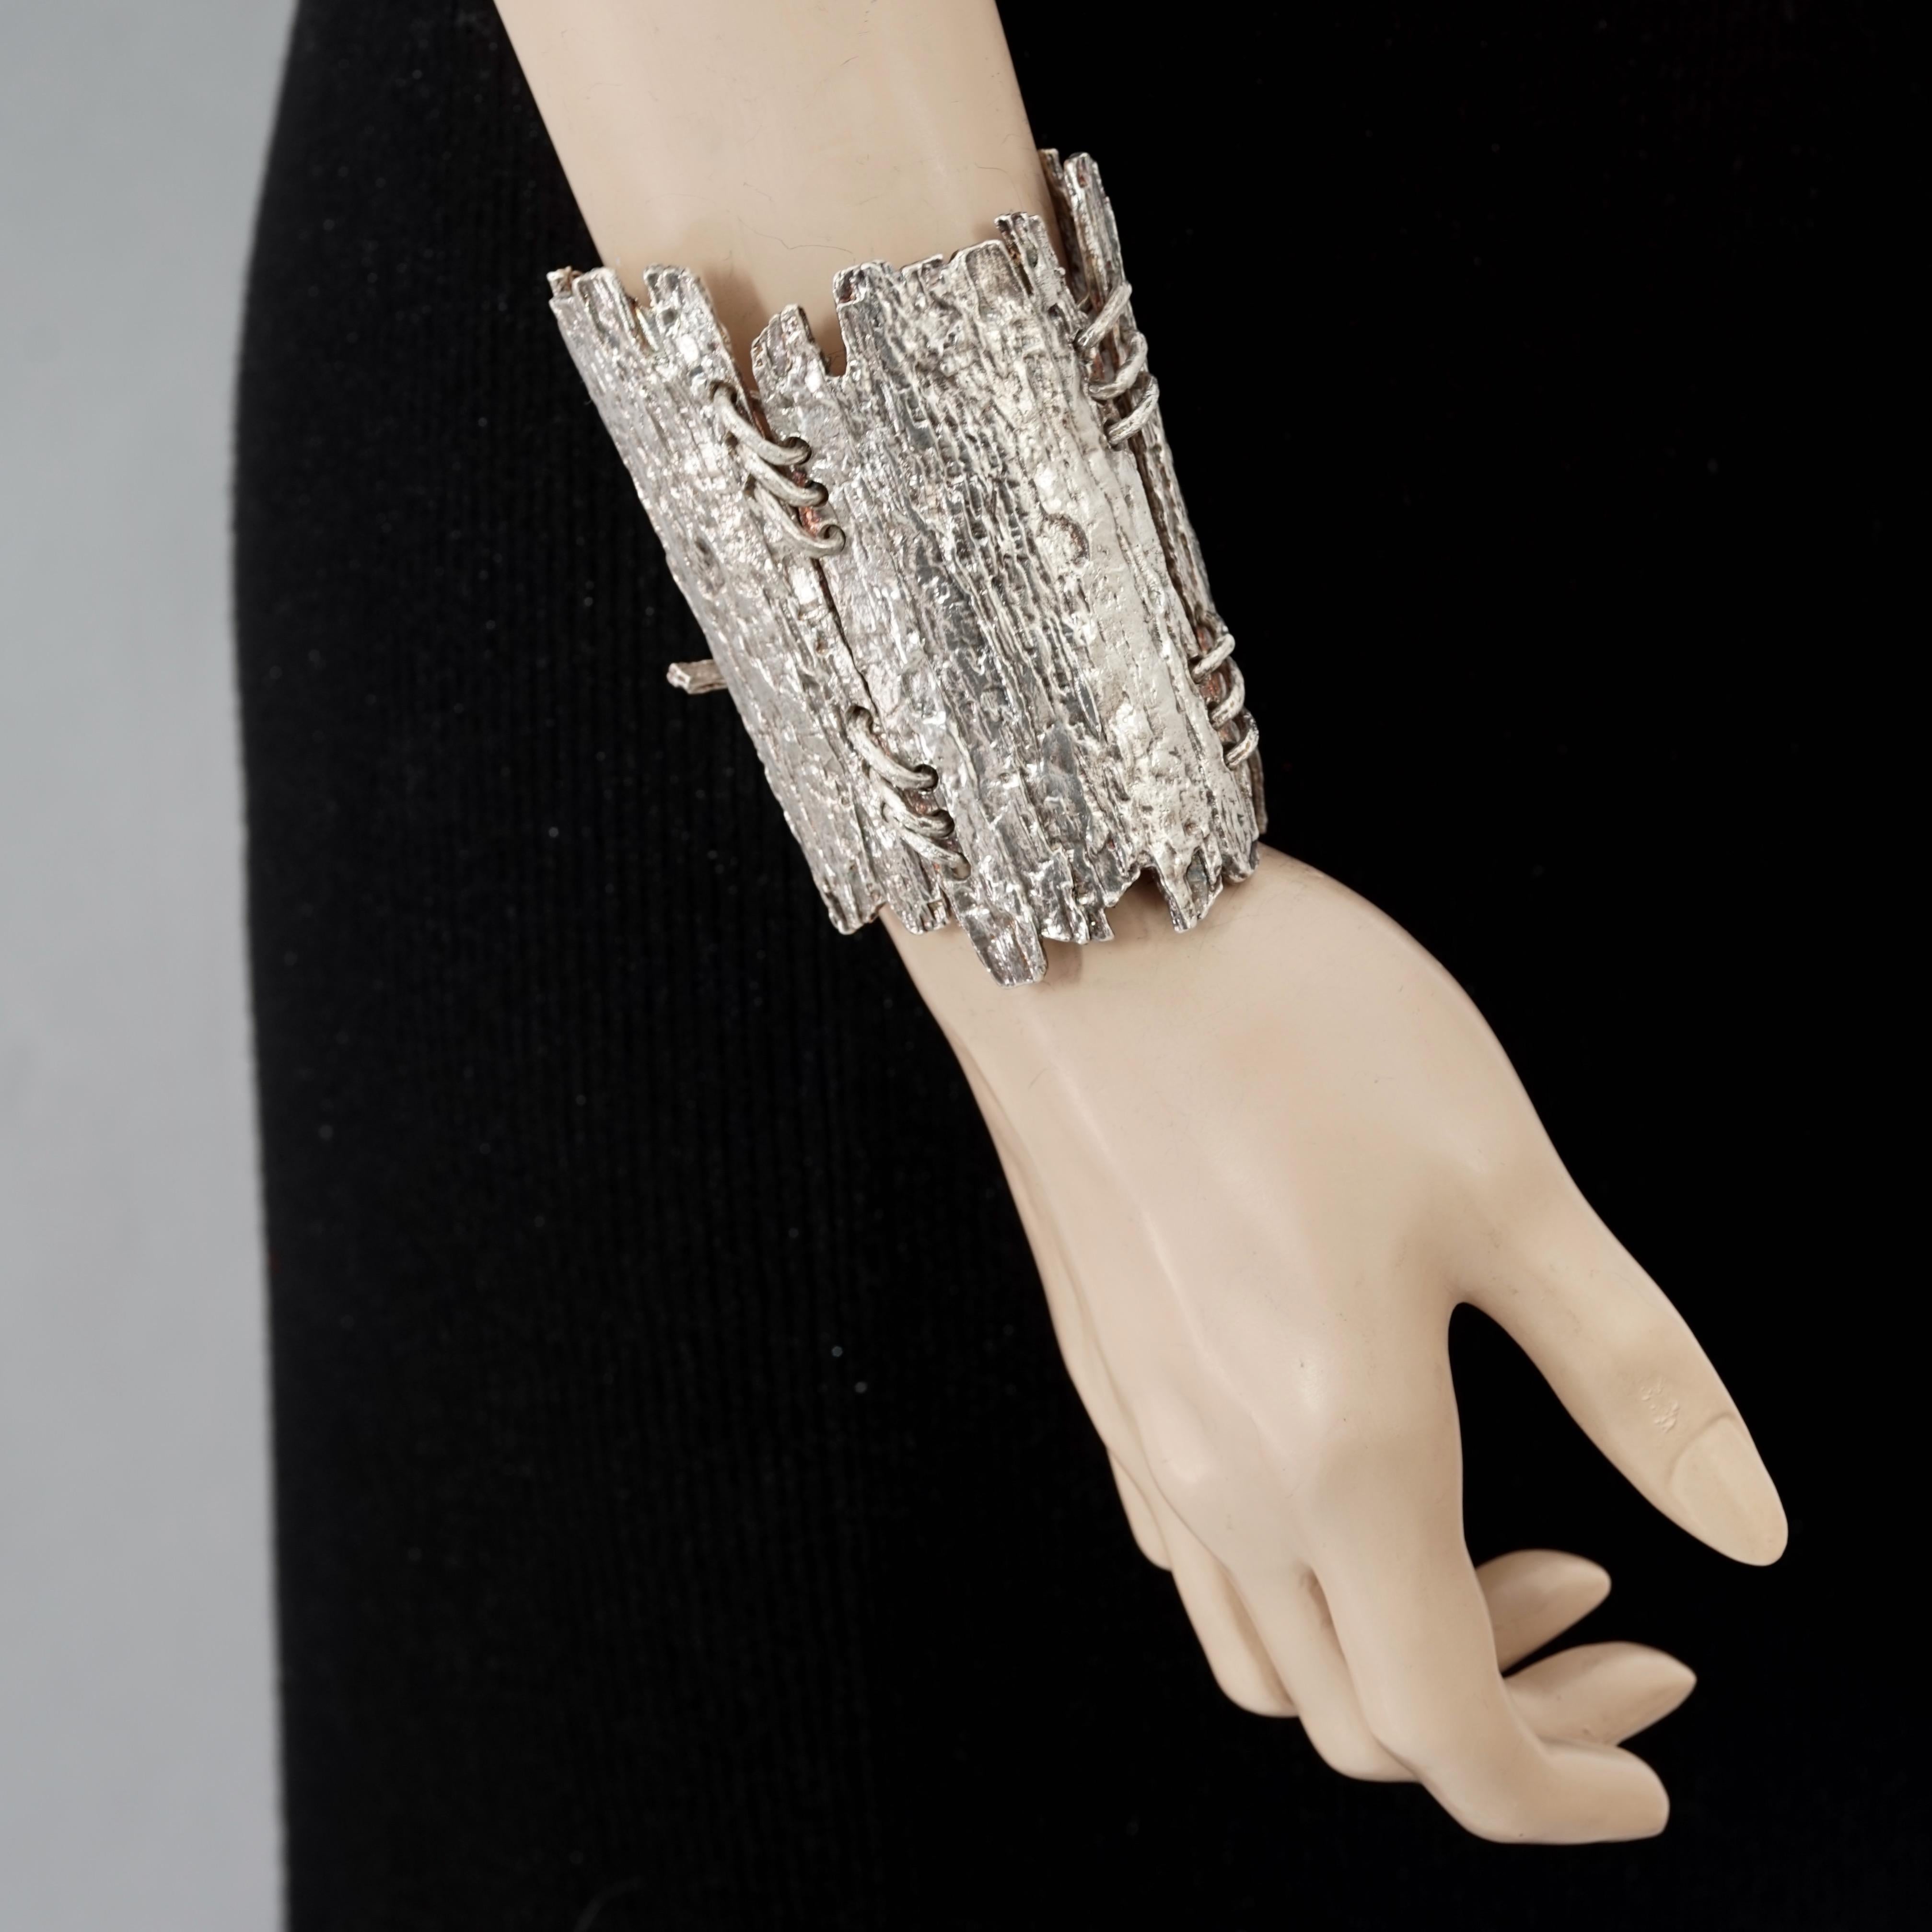 Vintage BICHE de BERE Jagged Textured Wide Statement Silver Cuff Bracelet

Measurements:
Height: 3.54 inches (9 cm)
Length: 6.29 inches (16 cm)

Features:
- 100% authentic BICHE DE BERE.
- Wide, jagged, textured, modernist articulated cuff